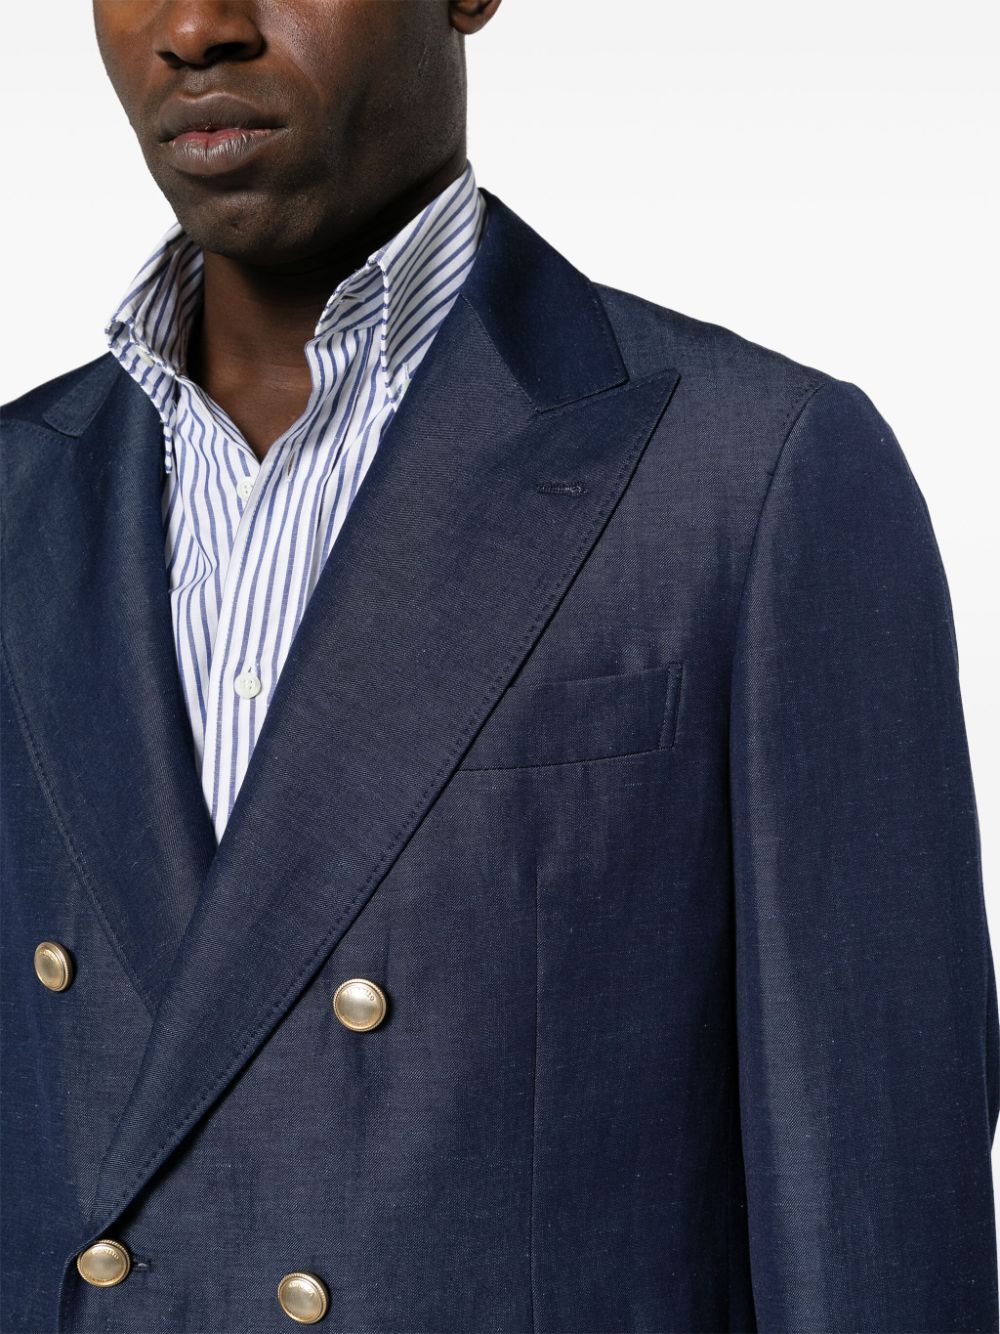 Indigo blue double-breasted suit